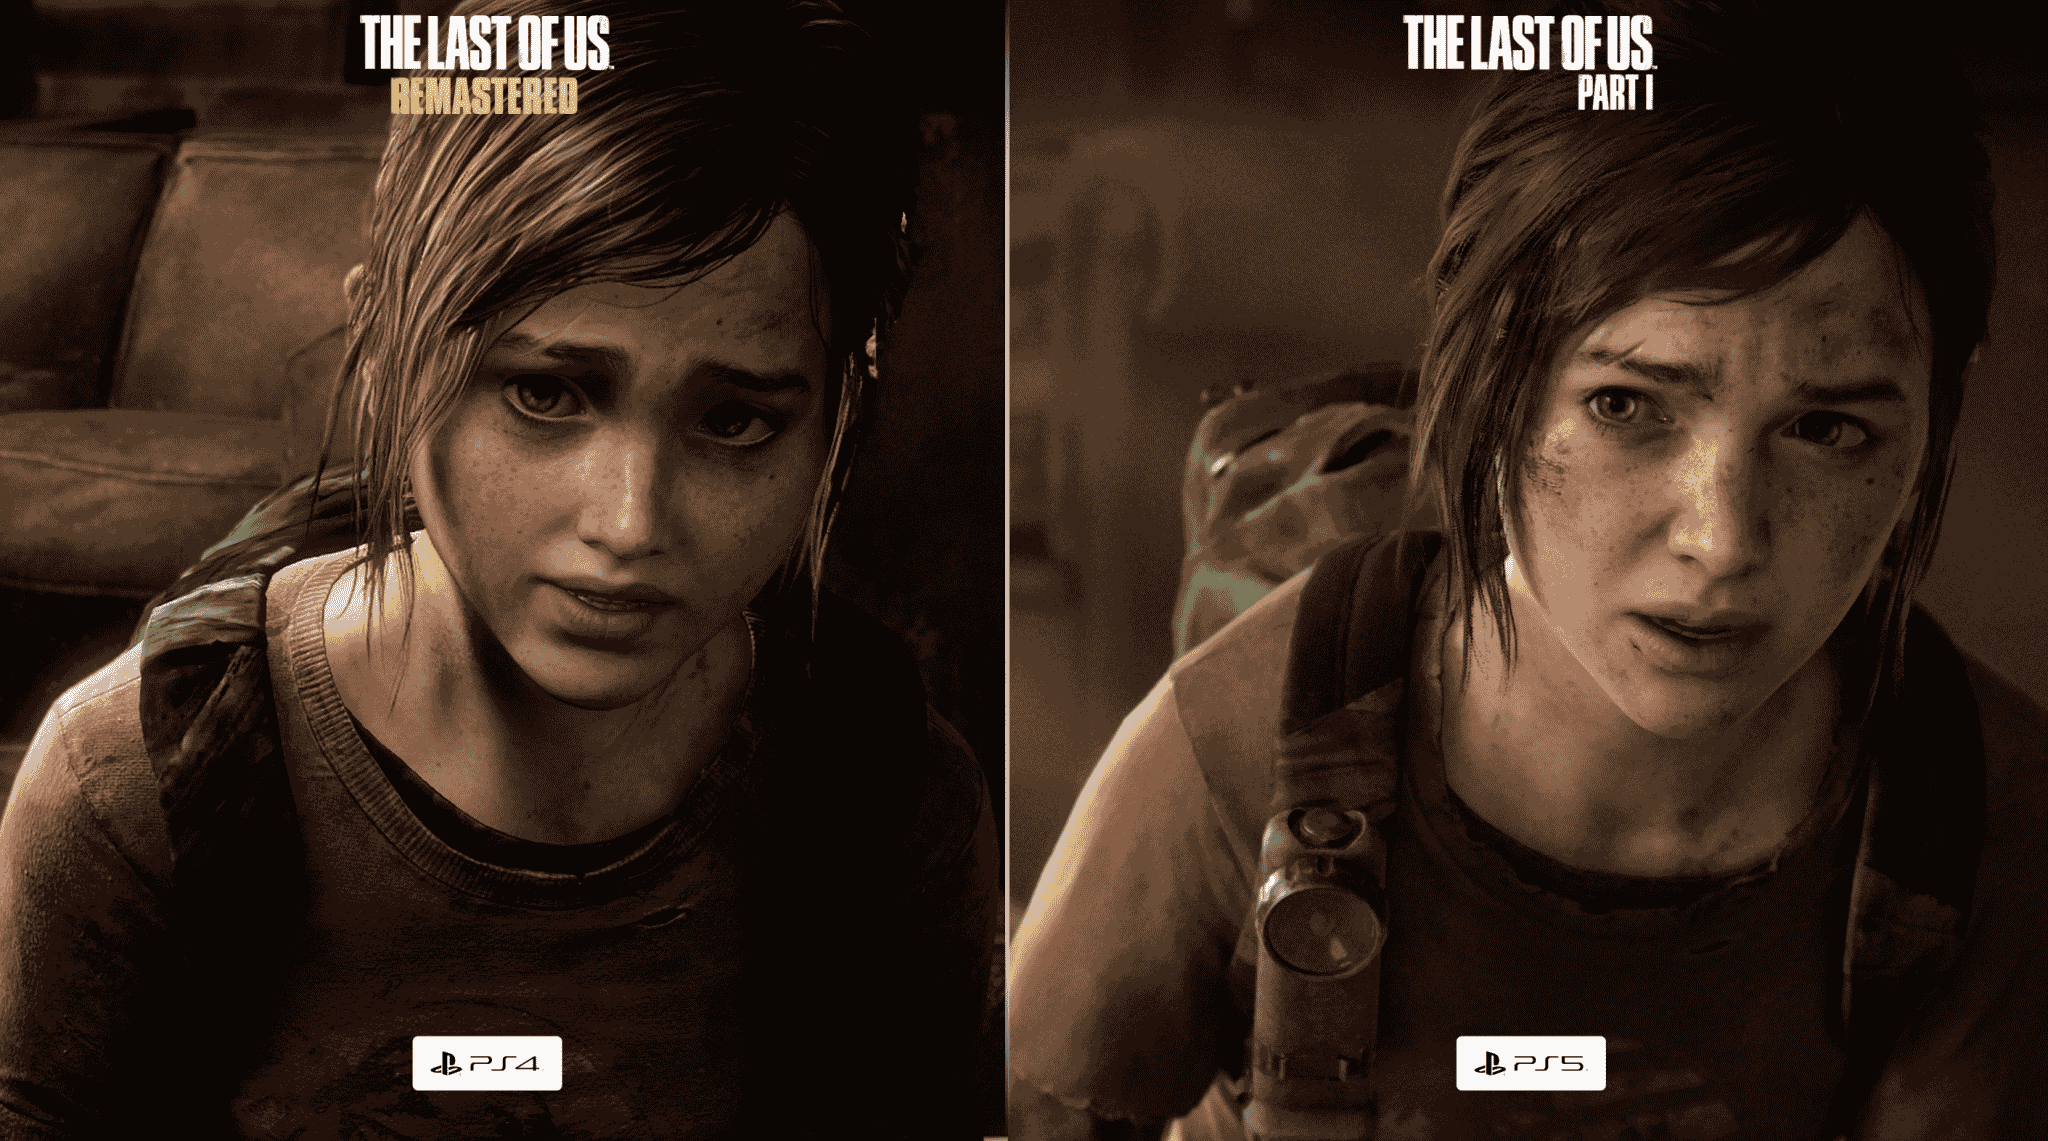 The last of us remake